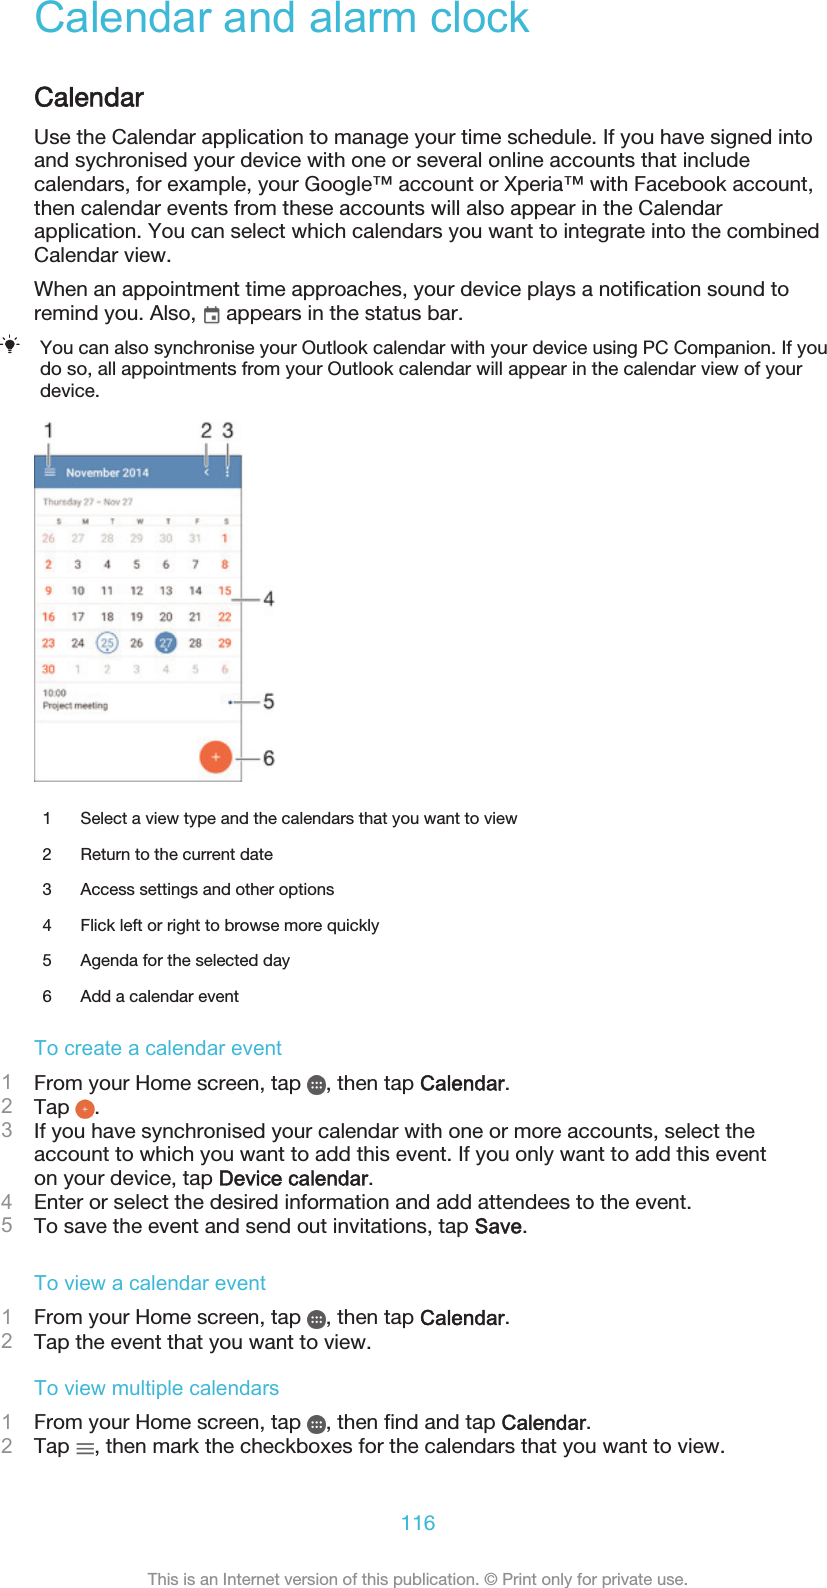 Calendar and alarm clockCalendarUse the Calendar application to manage your time schedule. If you have signed intoand sychronised your device with one or several online accounts that includecalendars, for example, your Google™ account or Xperia™ with Facebook account,then calendar events from these accounts will also appear in the Calendarapplication. You can select which calendars you want to integrate into the combinedCalendar view.When an appointment time approaches, your device plays a notification sound toremind you. Also,   appears in the status bar.You can also synchronise your Outlook calendar with your device using PC Companion. If youdo so, all appointments from your Outlook calendar will appear in the calendar view of yourdevice.1 Select a view type and the calendars that you want to view2 Return to the current date3 Access settings and other options4 Flick left or right to browse more quickly5 Agenda for the selected day6 Add a calendar eventTo create a calendar event1From your Home screen, tap  , then tap Calendar.2Tap  .3If you have synchronised your calendar with one or more accounts, select theaccount to which you want to add this event. If you only want to add this eventon your device, tap Device calendar.4Enter or select the desired information and add attendees to the event.5To save the event and send out invitations, tap Save.To view a calendar event1From your Home screen, tap  , then tap Calendar.2Tap the event that you want to view.To view multiple calendars1From your Home screen, tap  , then find and tap Calendar.2Tap  , then mark the checkboxes for the calendars that you want to view.116This is an Internet version of this publication. © Print only for private use.